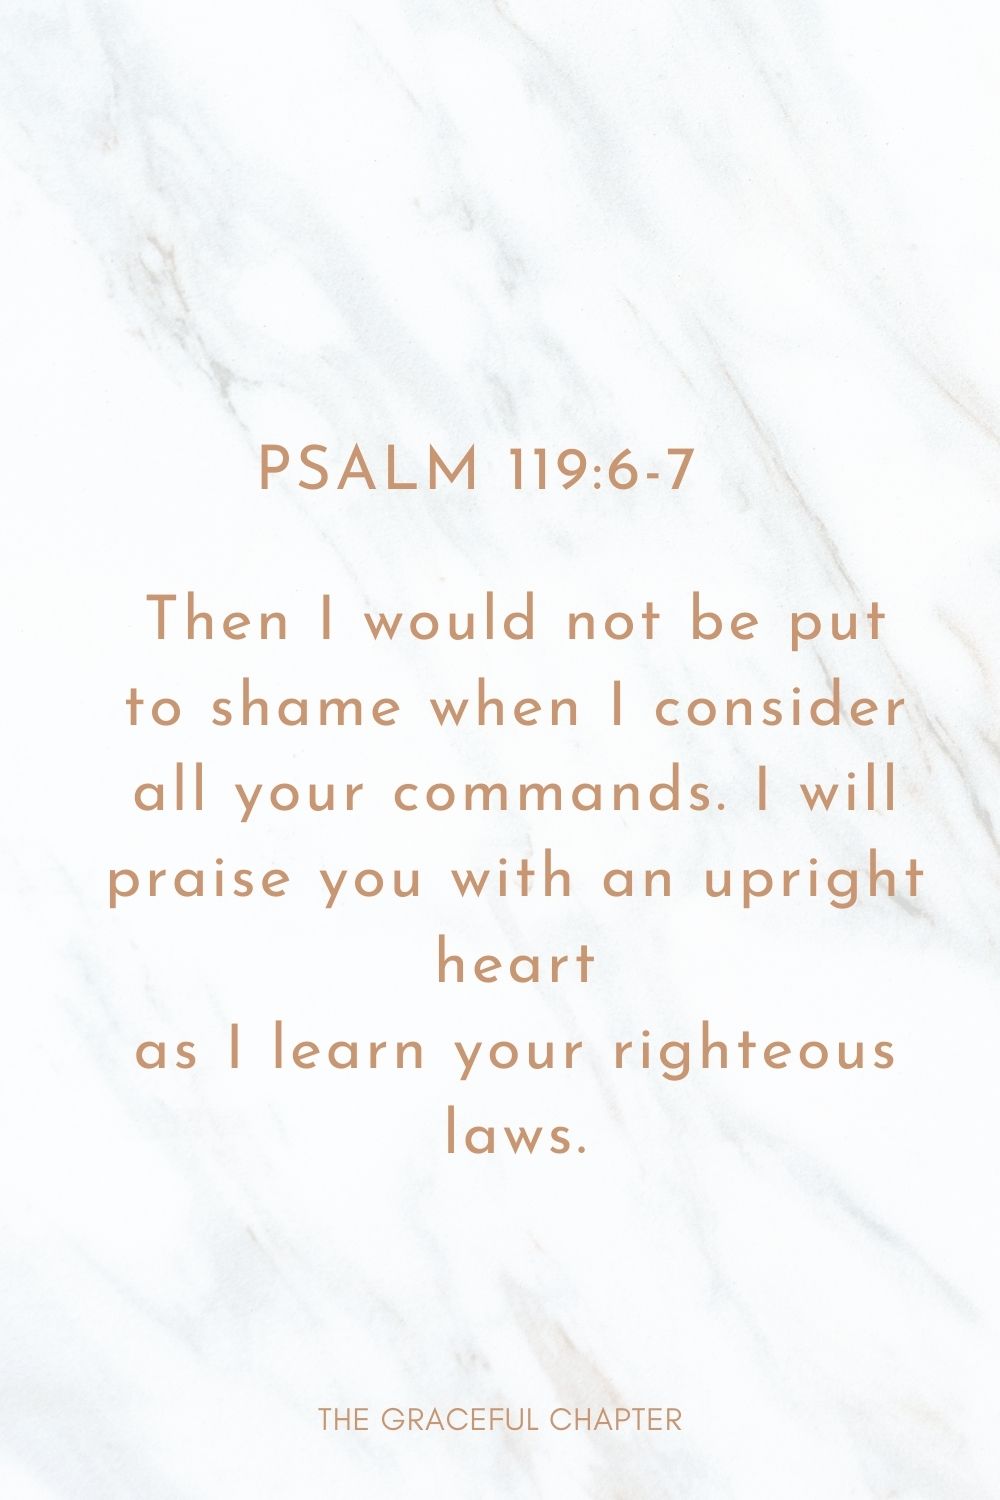 Then I would not be put to shame when I consider all your commands. I will praise you with an upright heart as I learn your righteous laws. Psalm 119:6-7